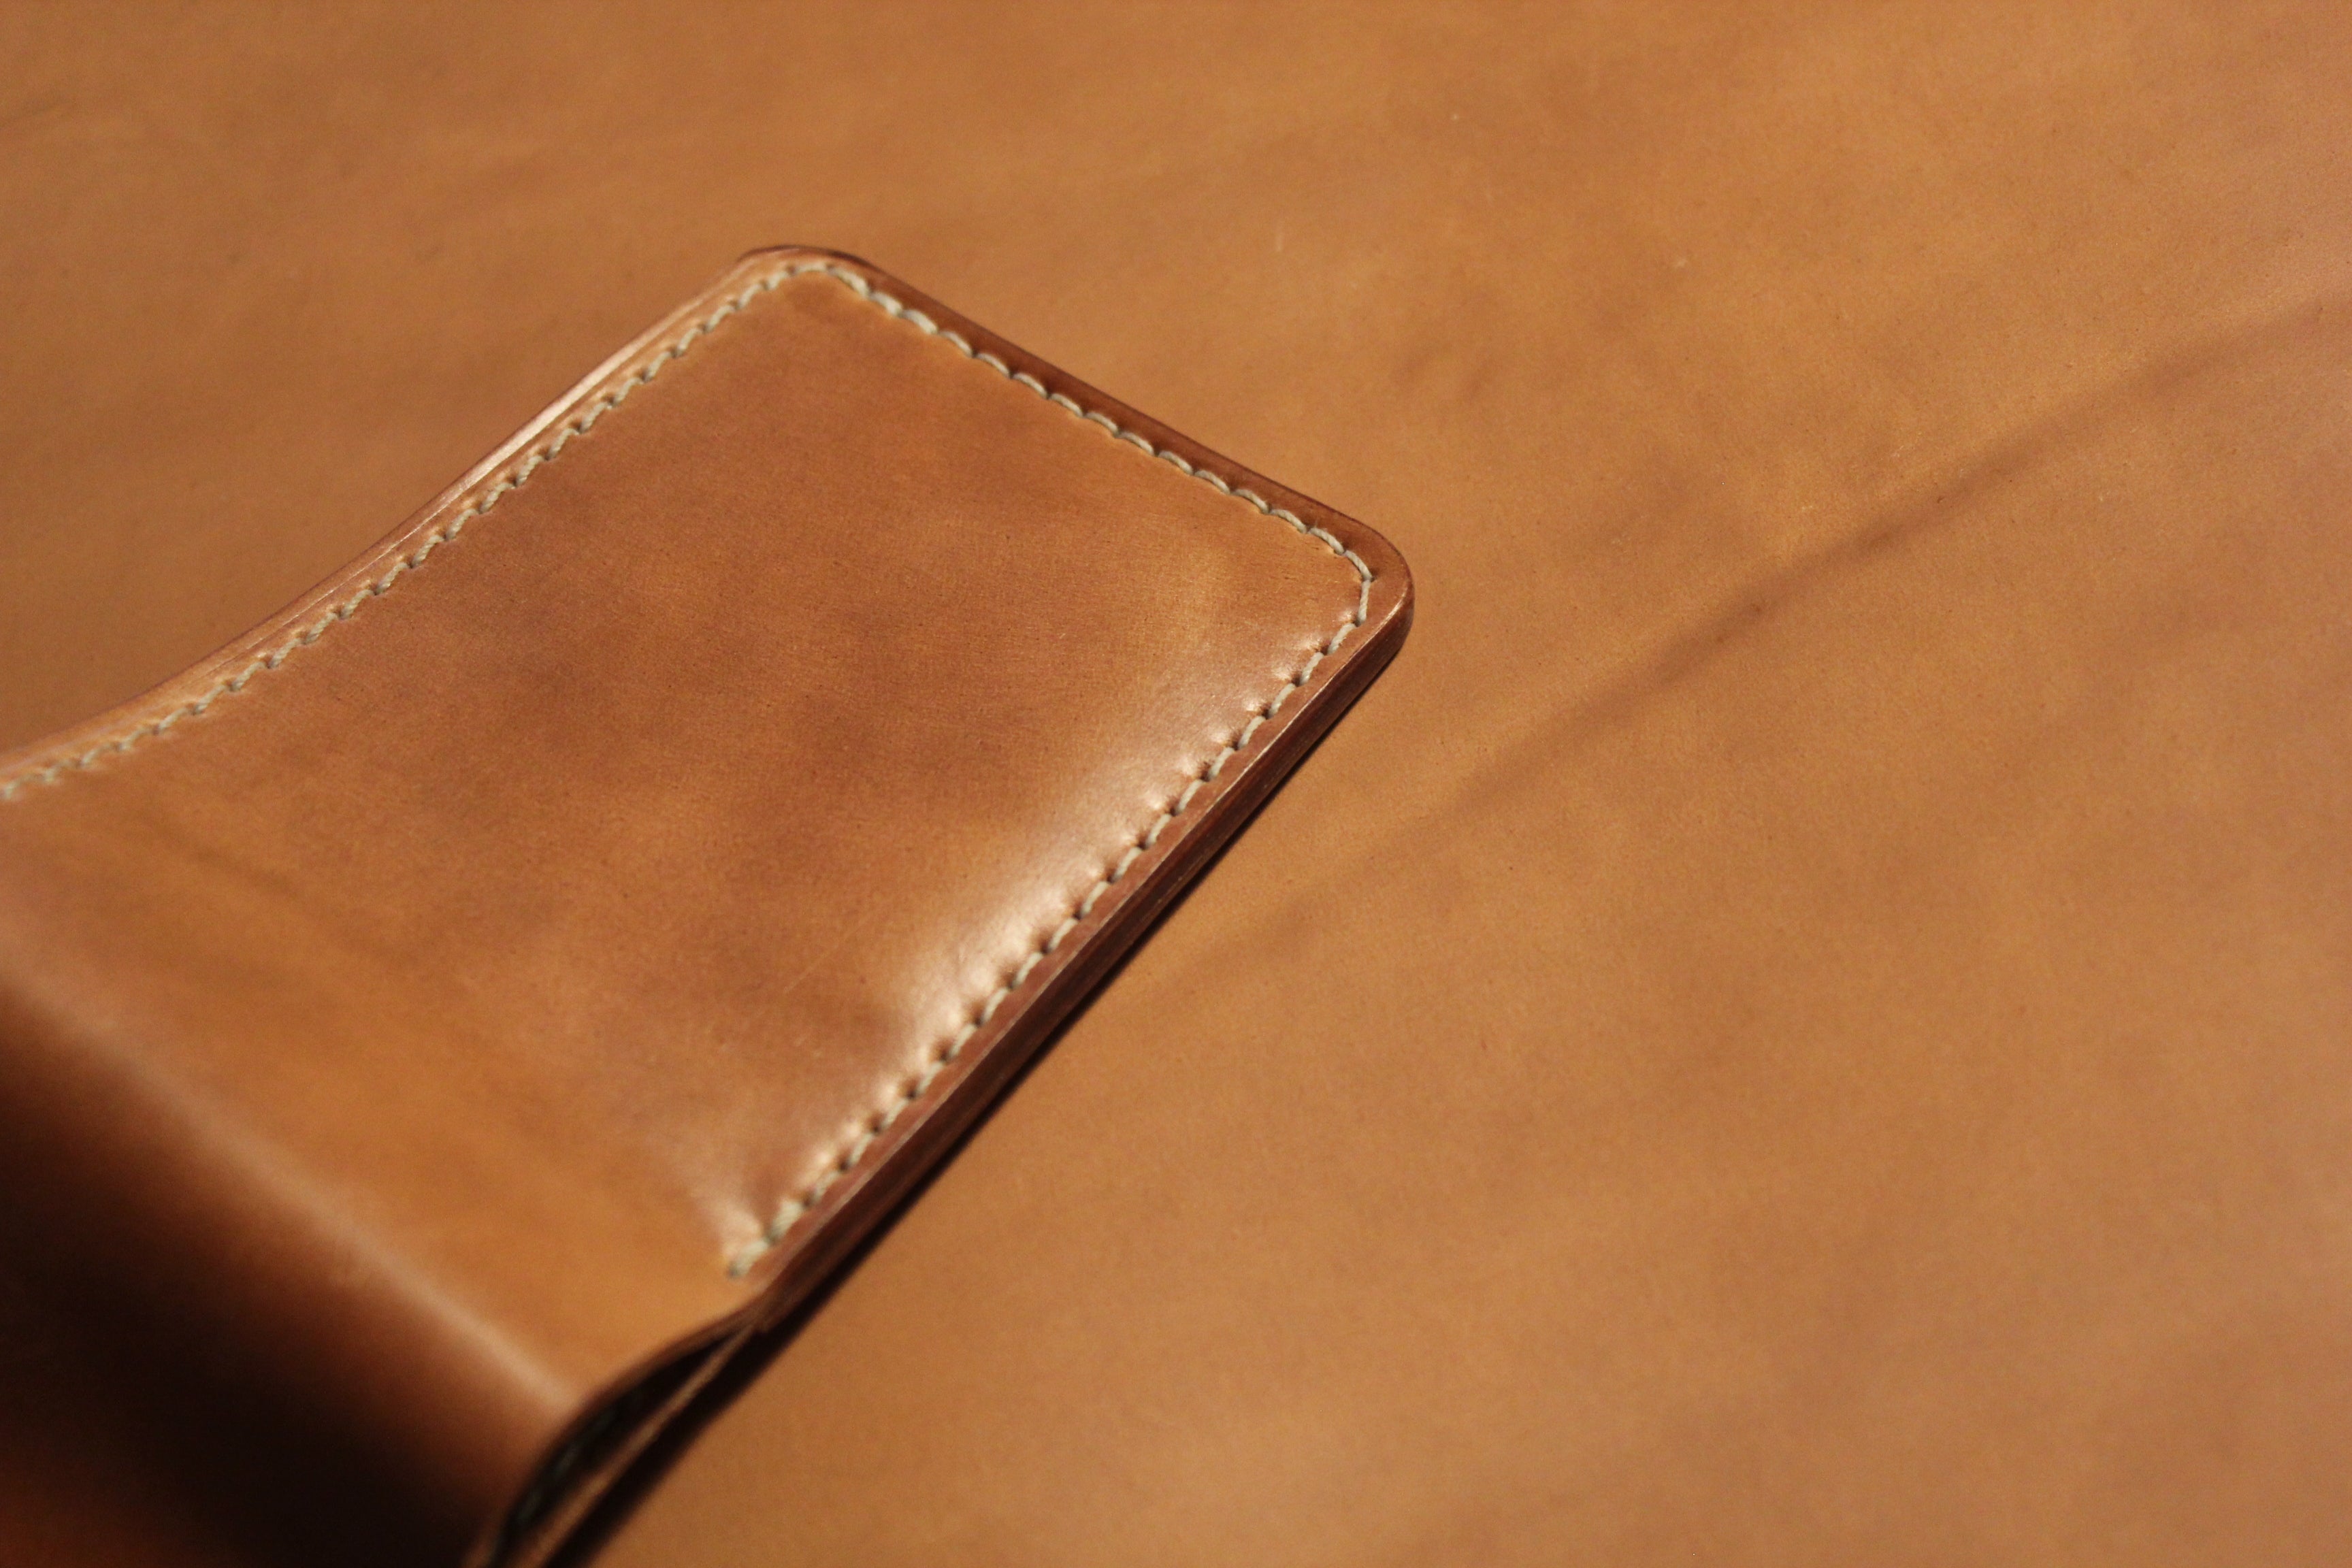 Horween Unglazed Natural Shell Cordovan with Venetian Leather Balm Application